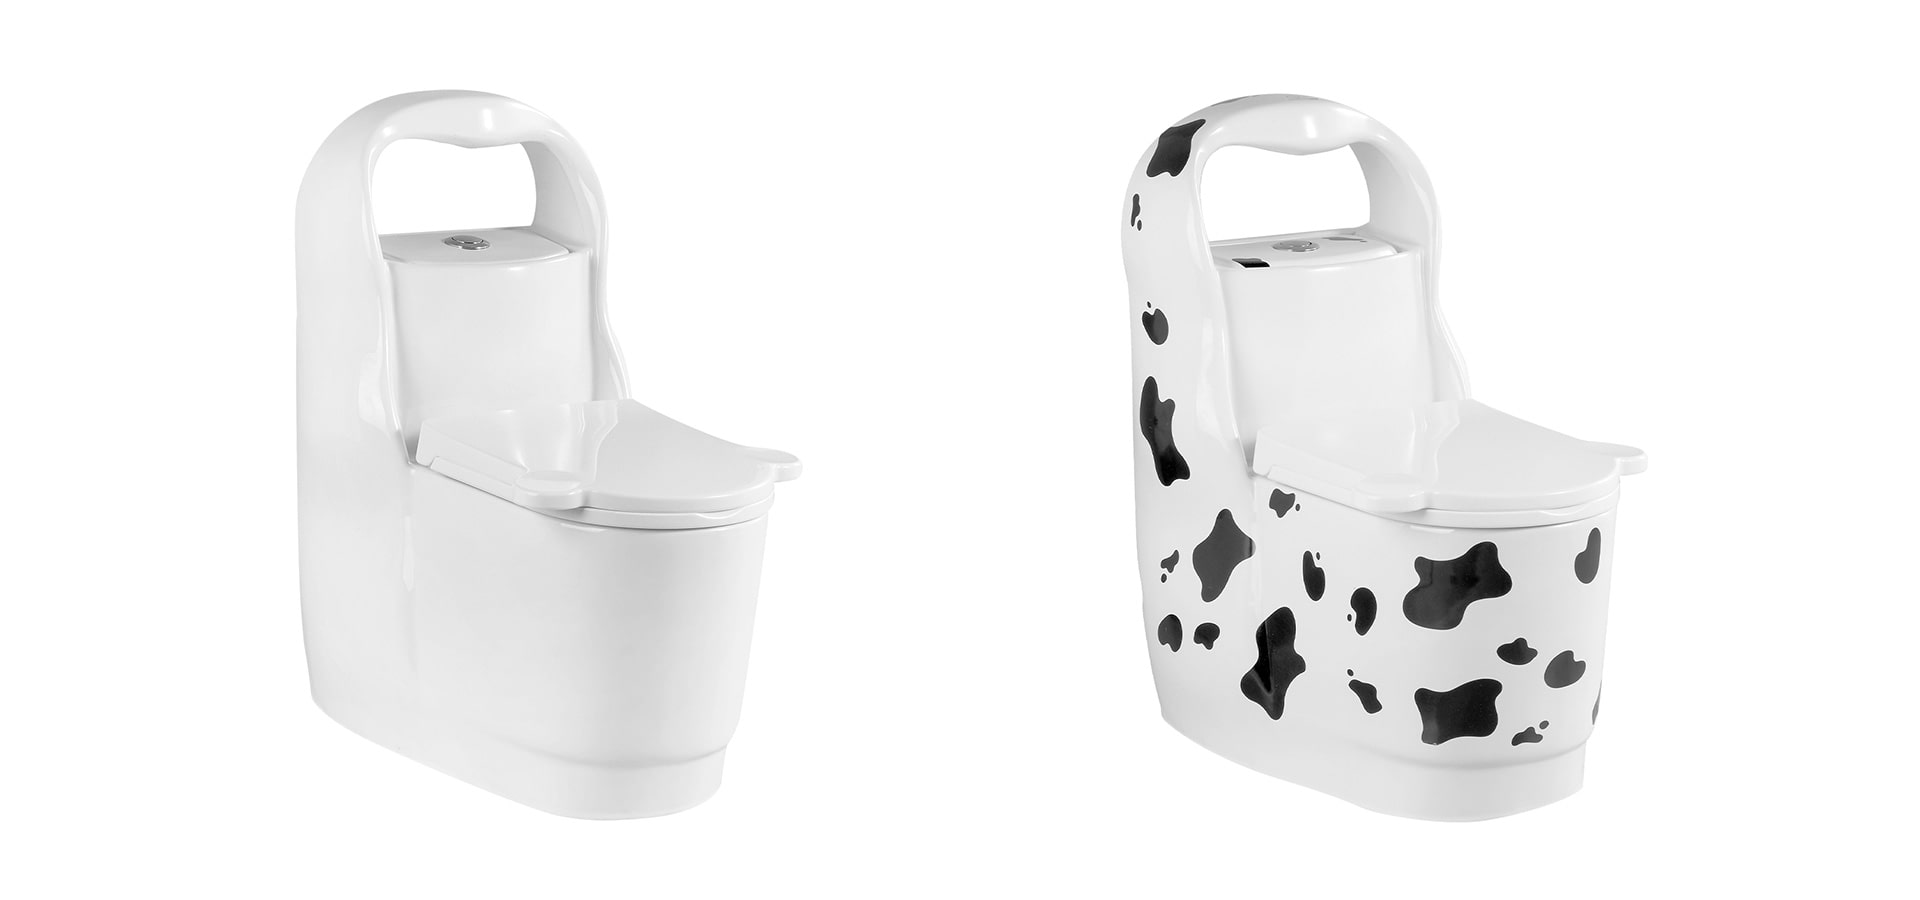 Factory price kindergarten children ceramic one piece toilet WA-9000 available in pure white and cow pattern colors. 